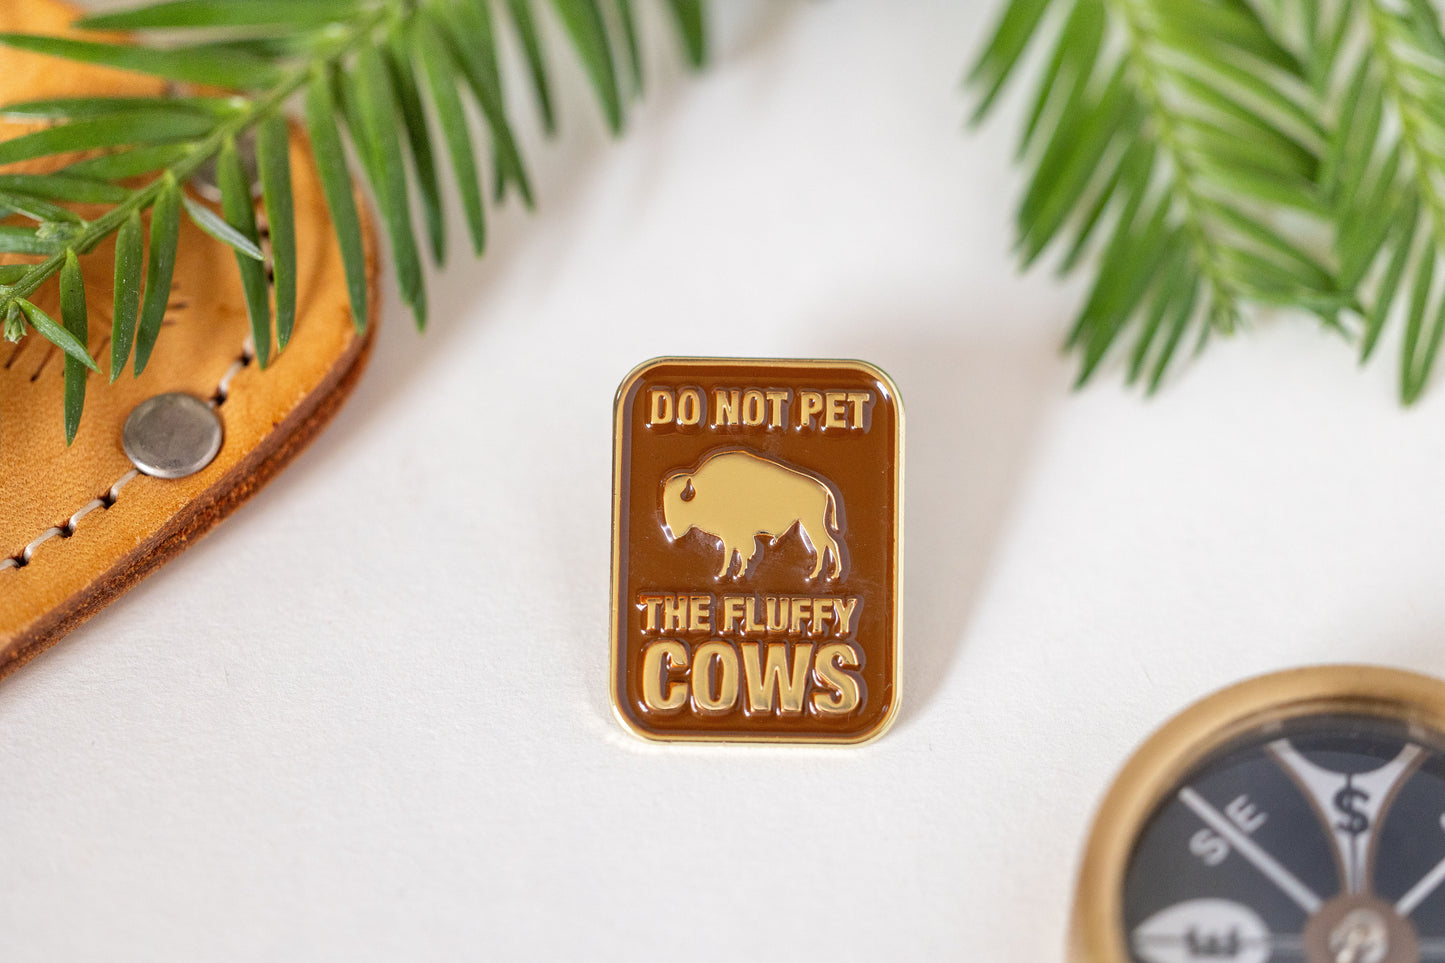 Don't Pet The Fluffy Cows| Enamel Pin | Collectible Lapel Pin